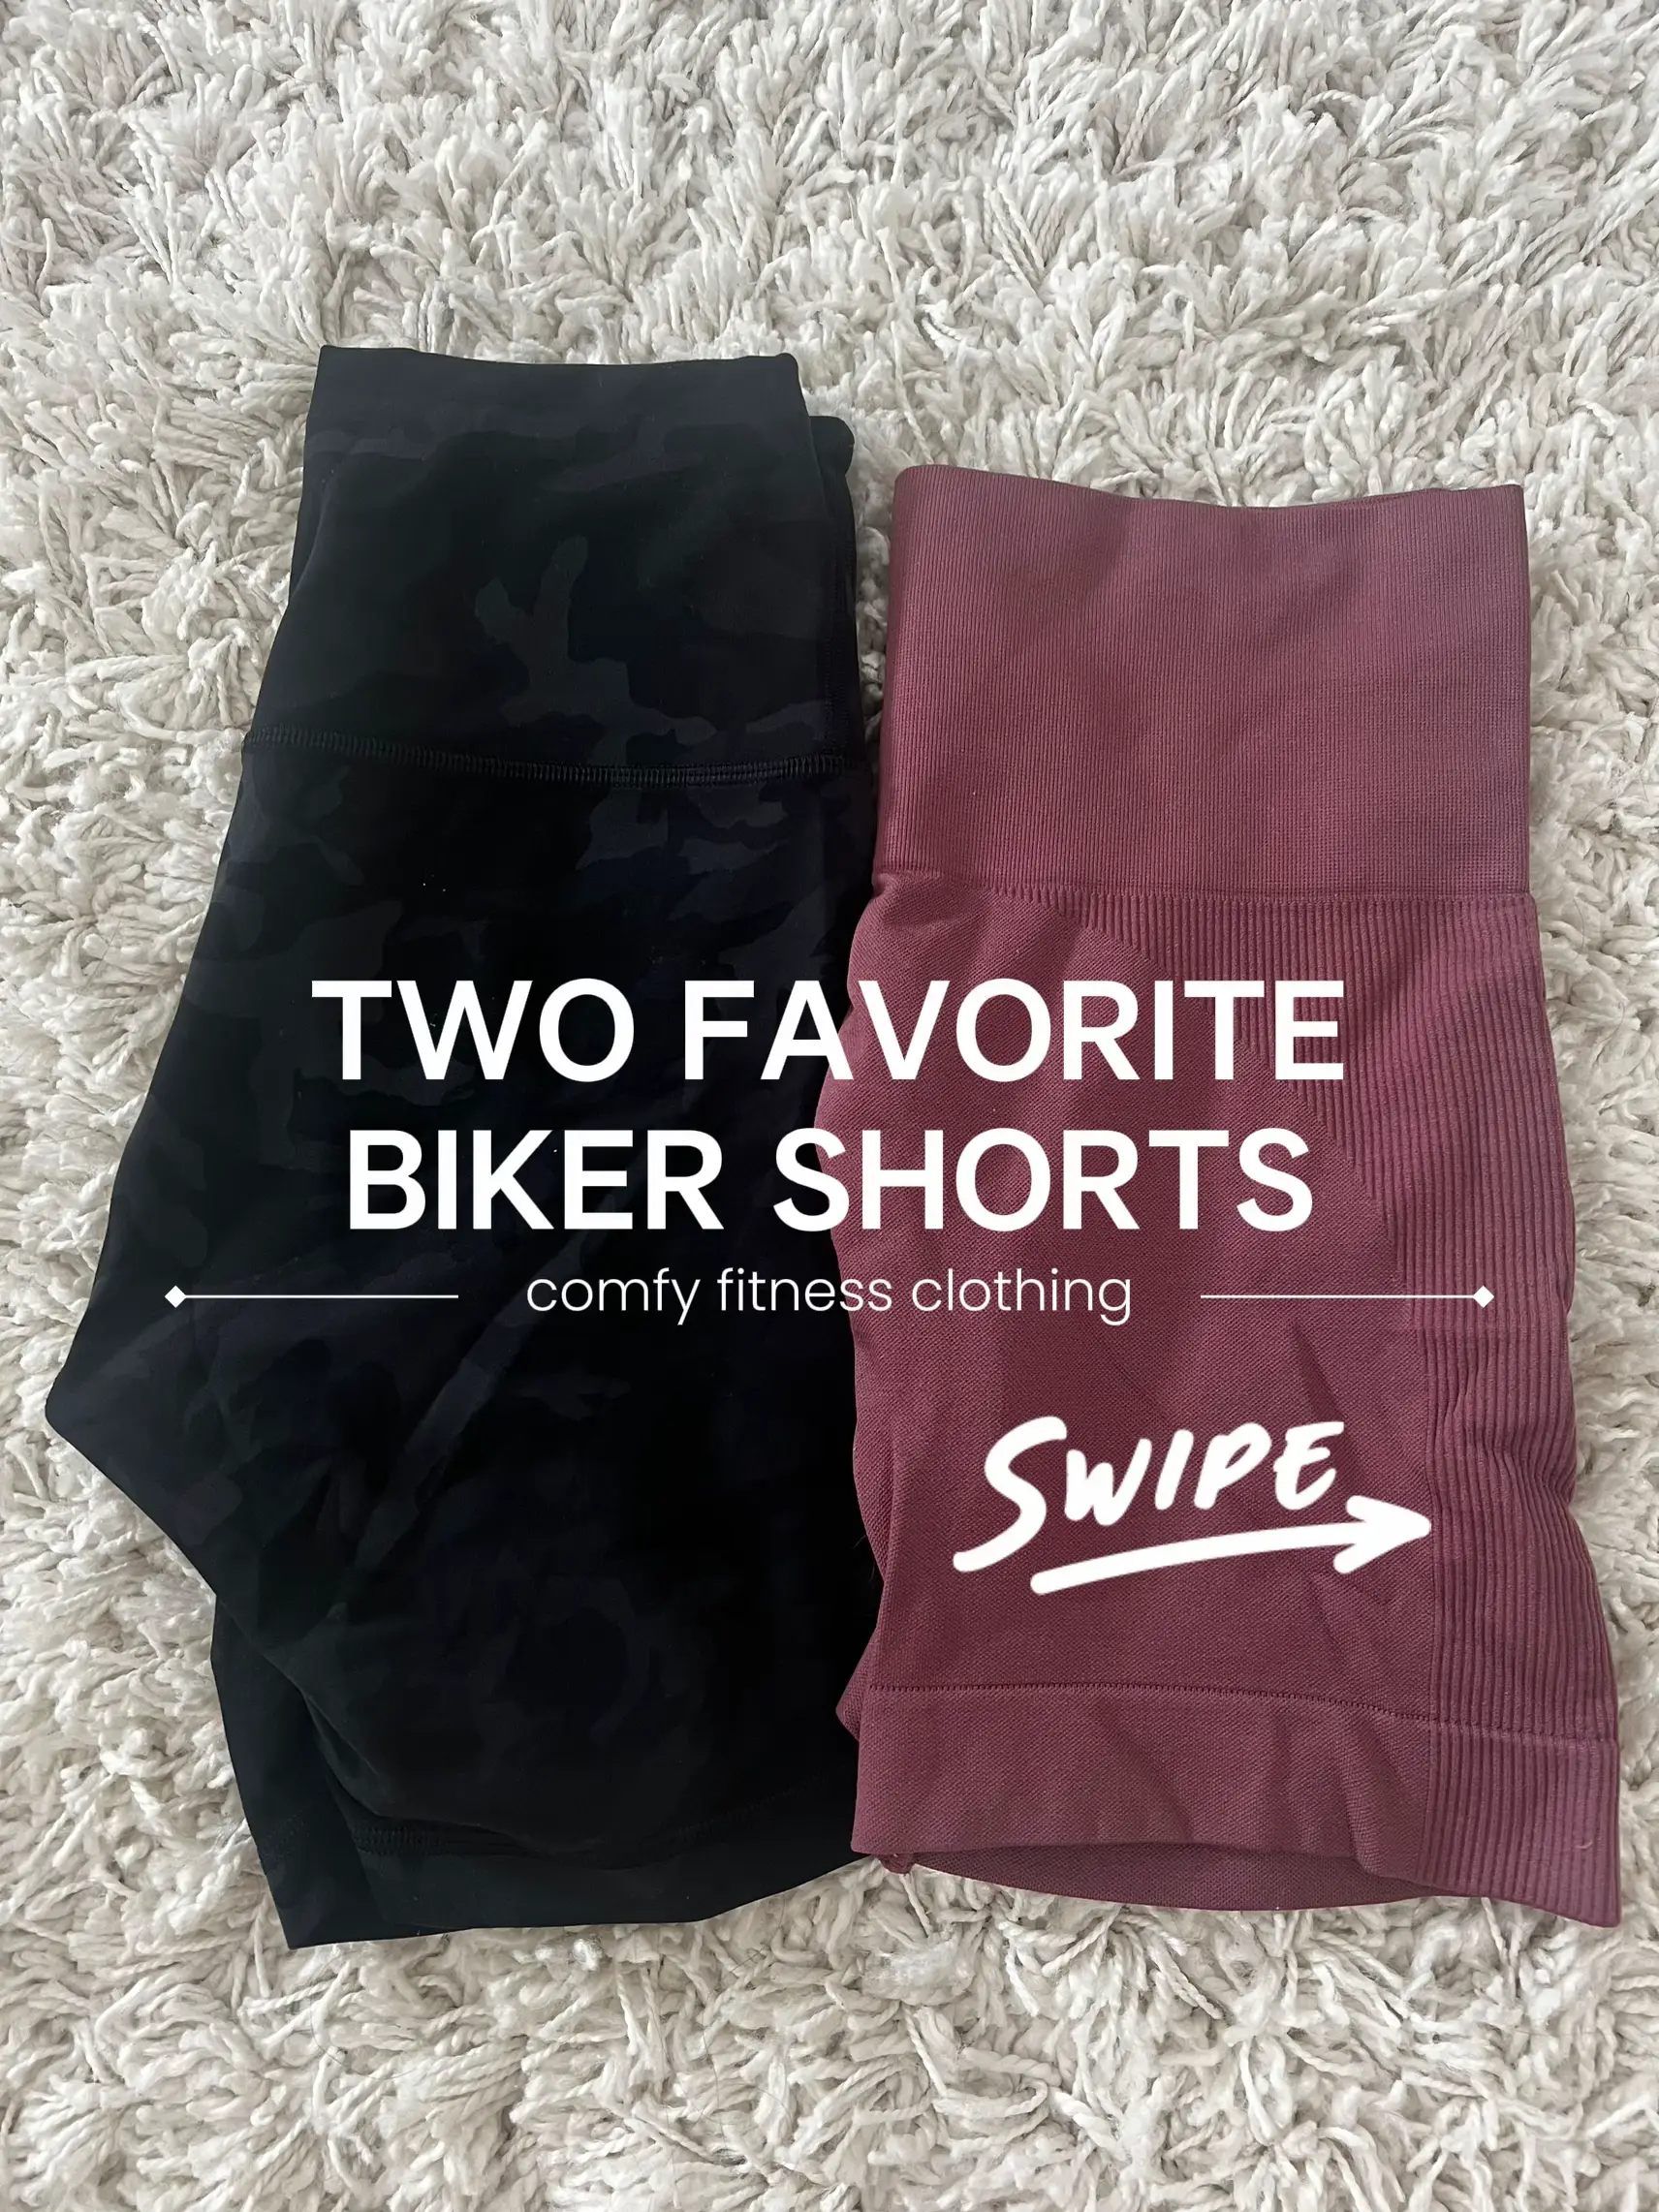 2-pack Danskin Ladies' Bike Shorts are at Costco! 🤩 These have a